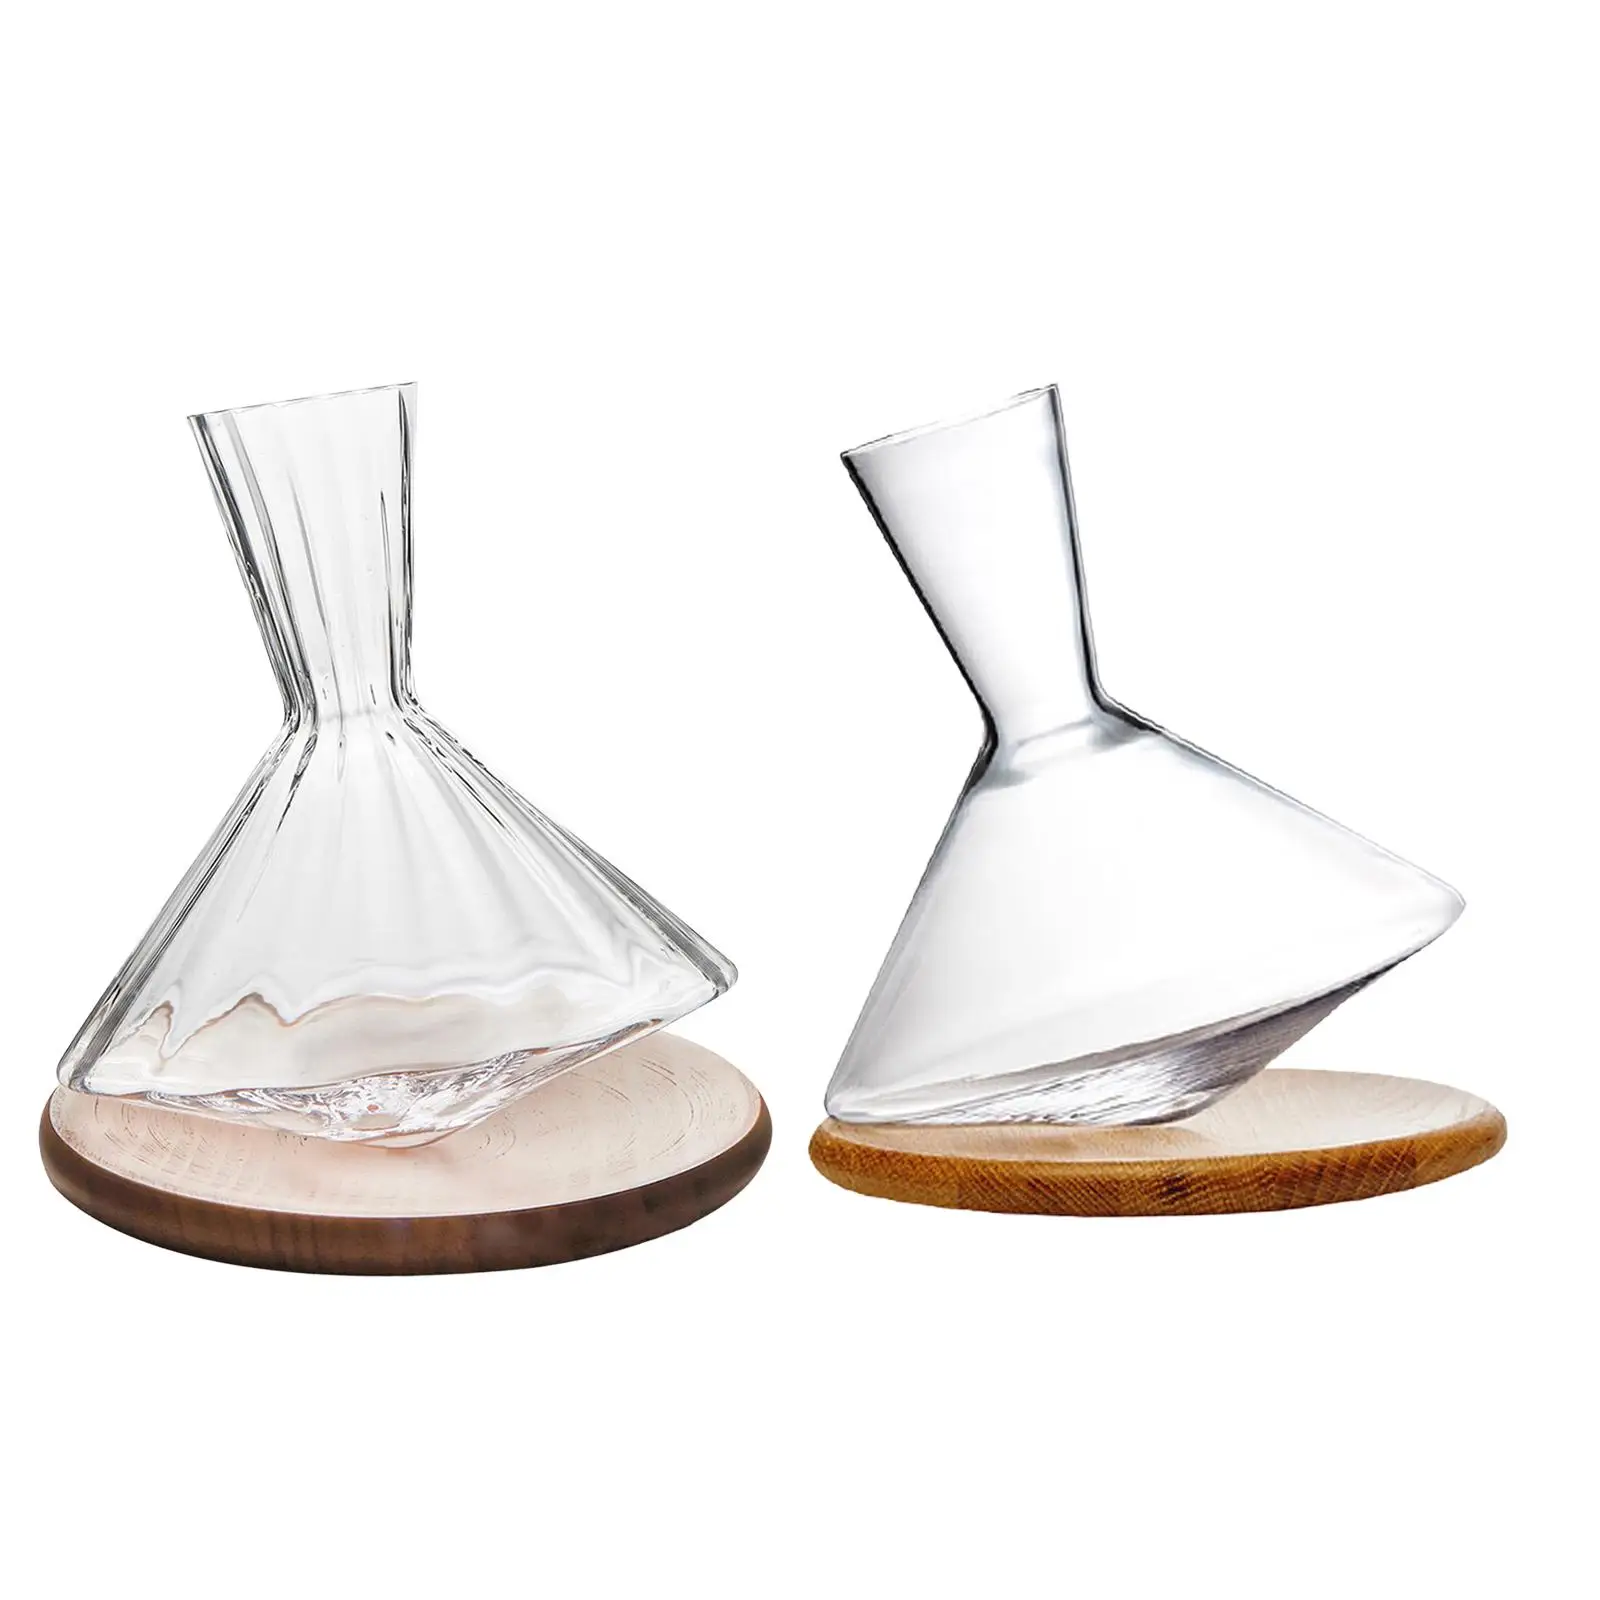 Tumbler 1000ml Decanter Wine Container Wine Pitcher Wine Accessories Wine Carafe Glass Decanter for Home Dining Room Restaurant